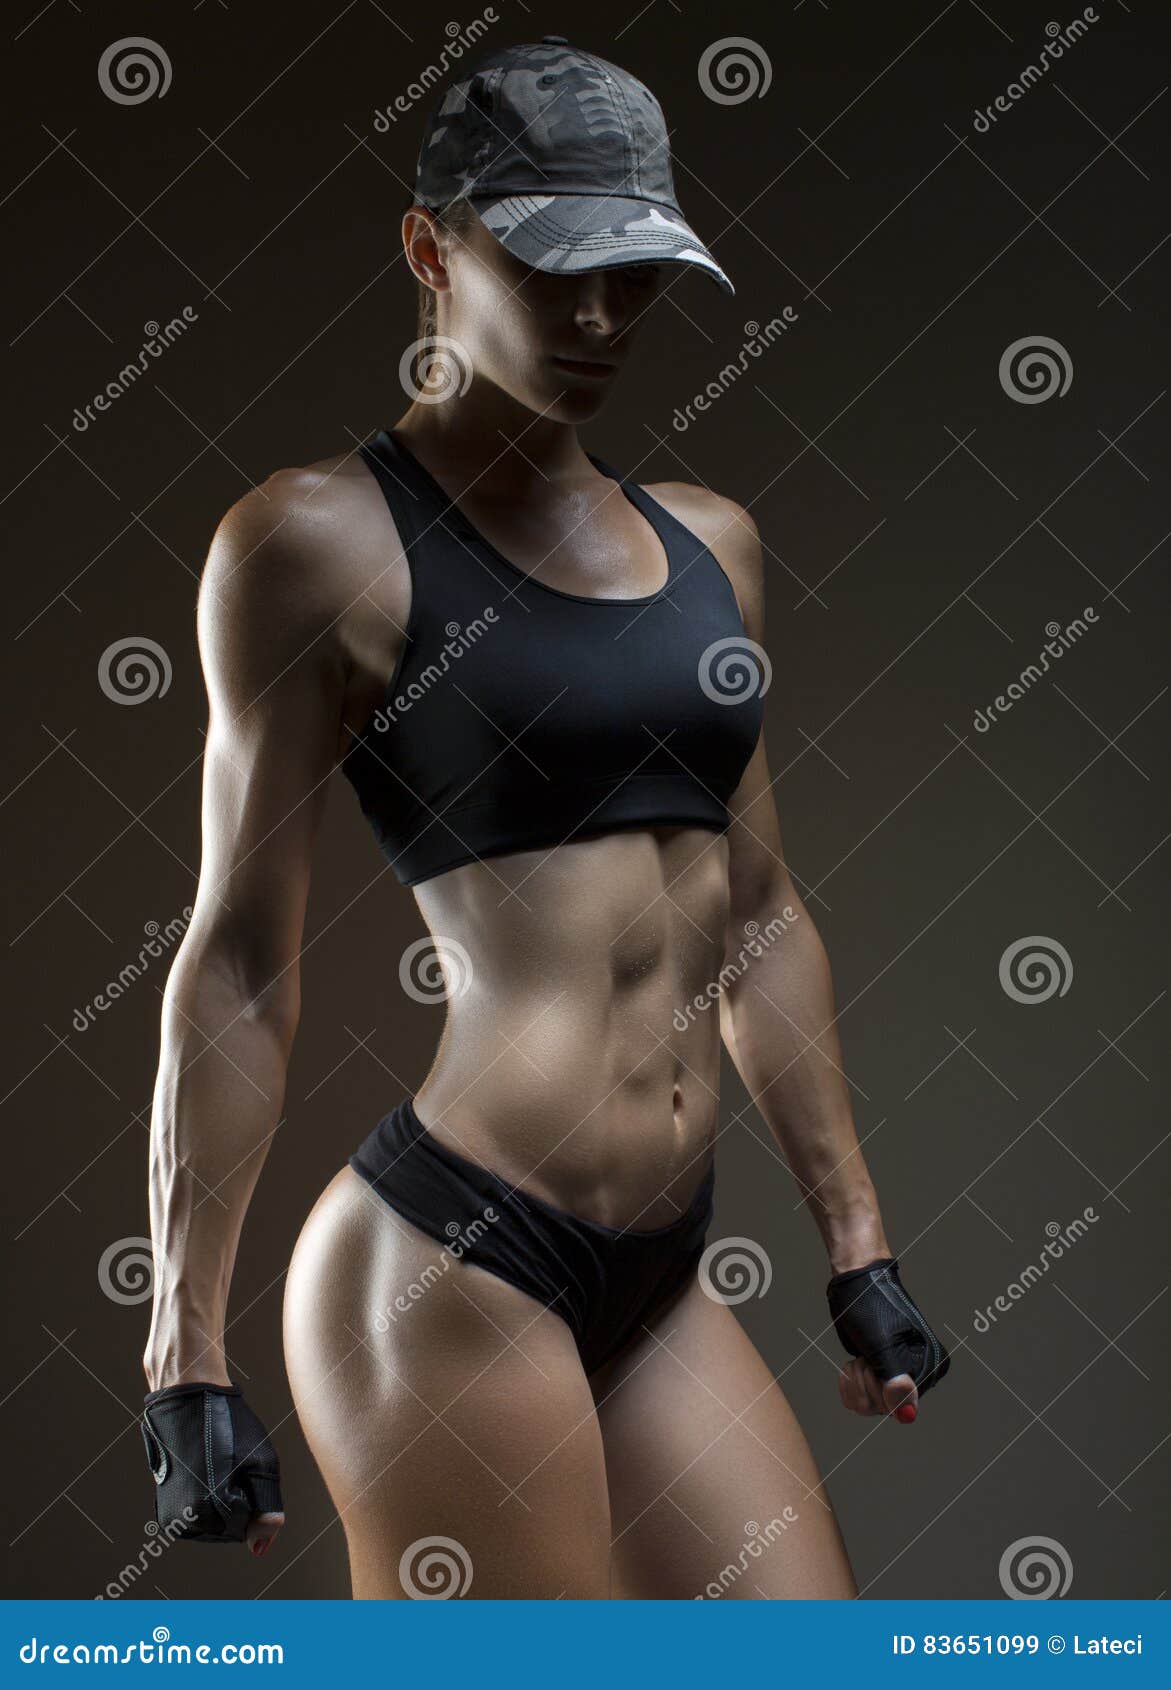 Fotka „Sexy fit woman in a cap posing on red background. Image of fitness  woman in sports clothing. Young female model with muscular body.“ ze služby  Stock